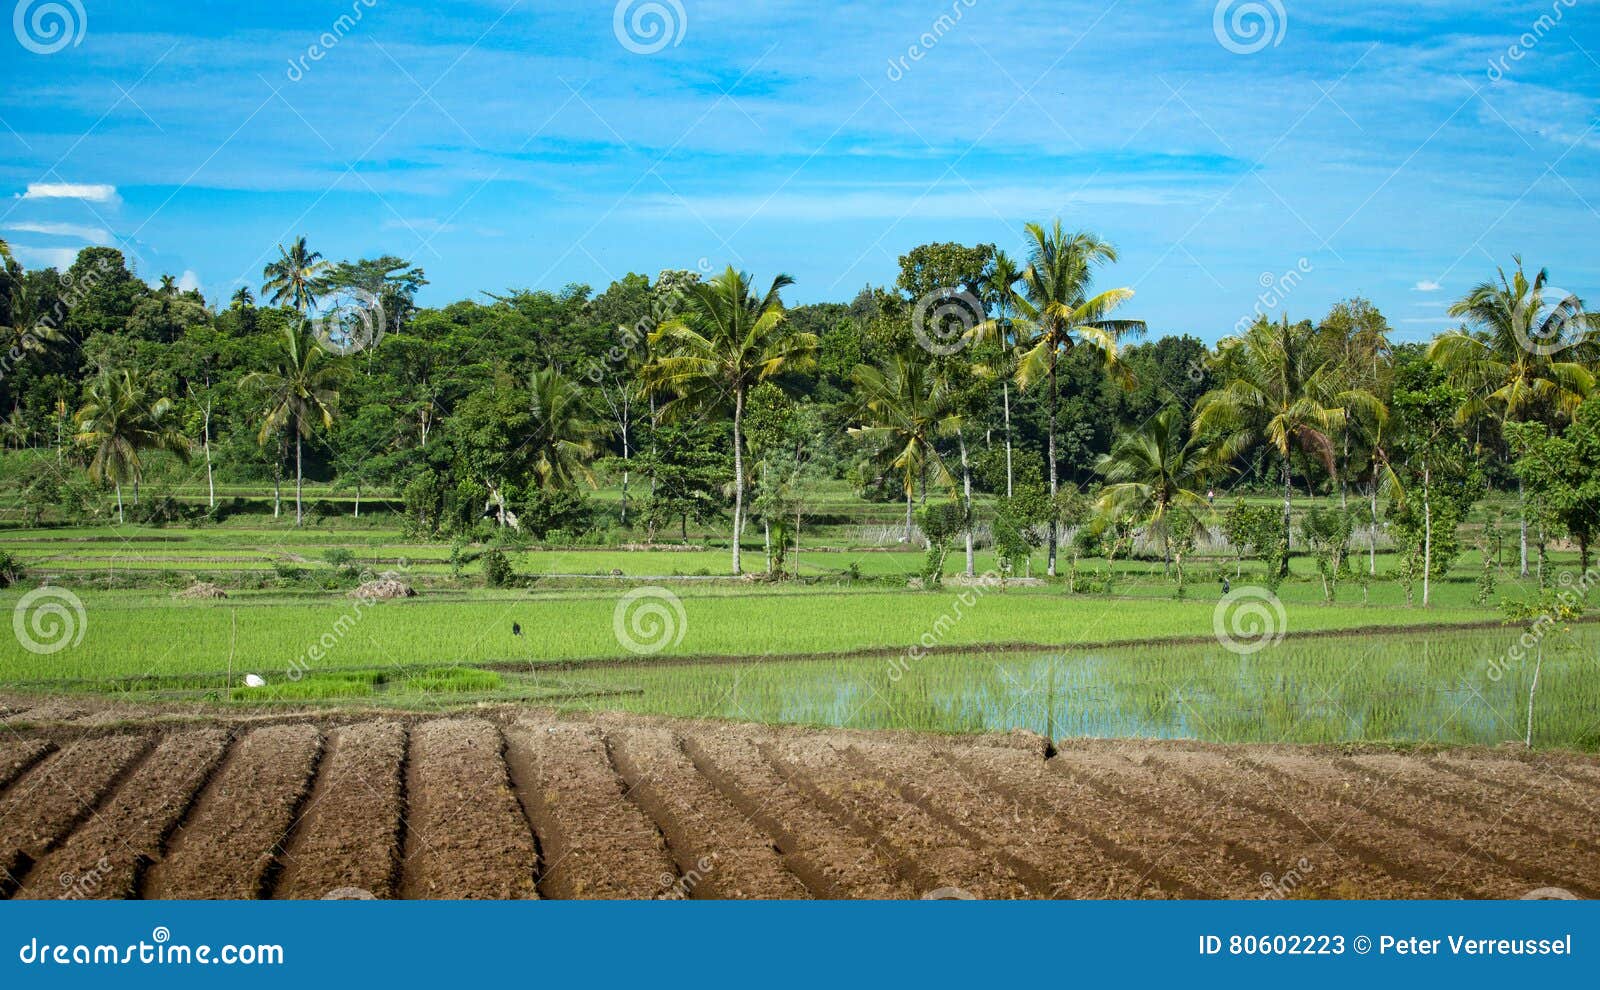 ricefields with bare ground